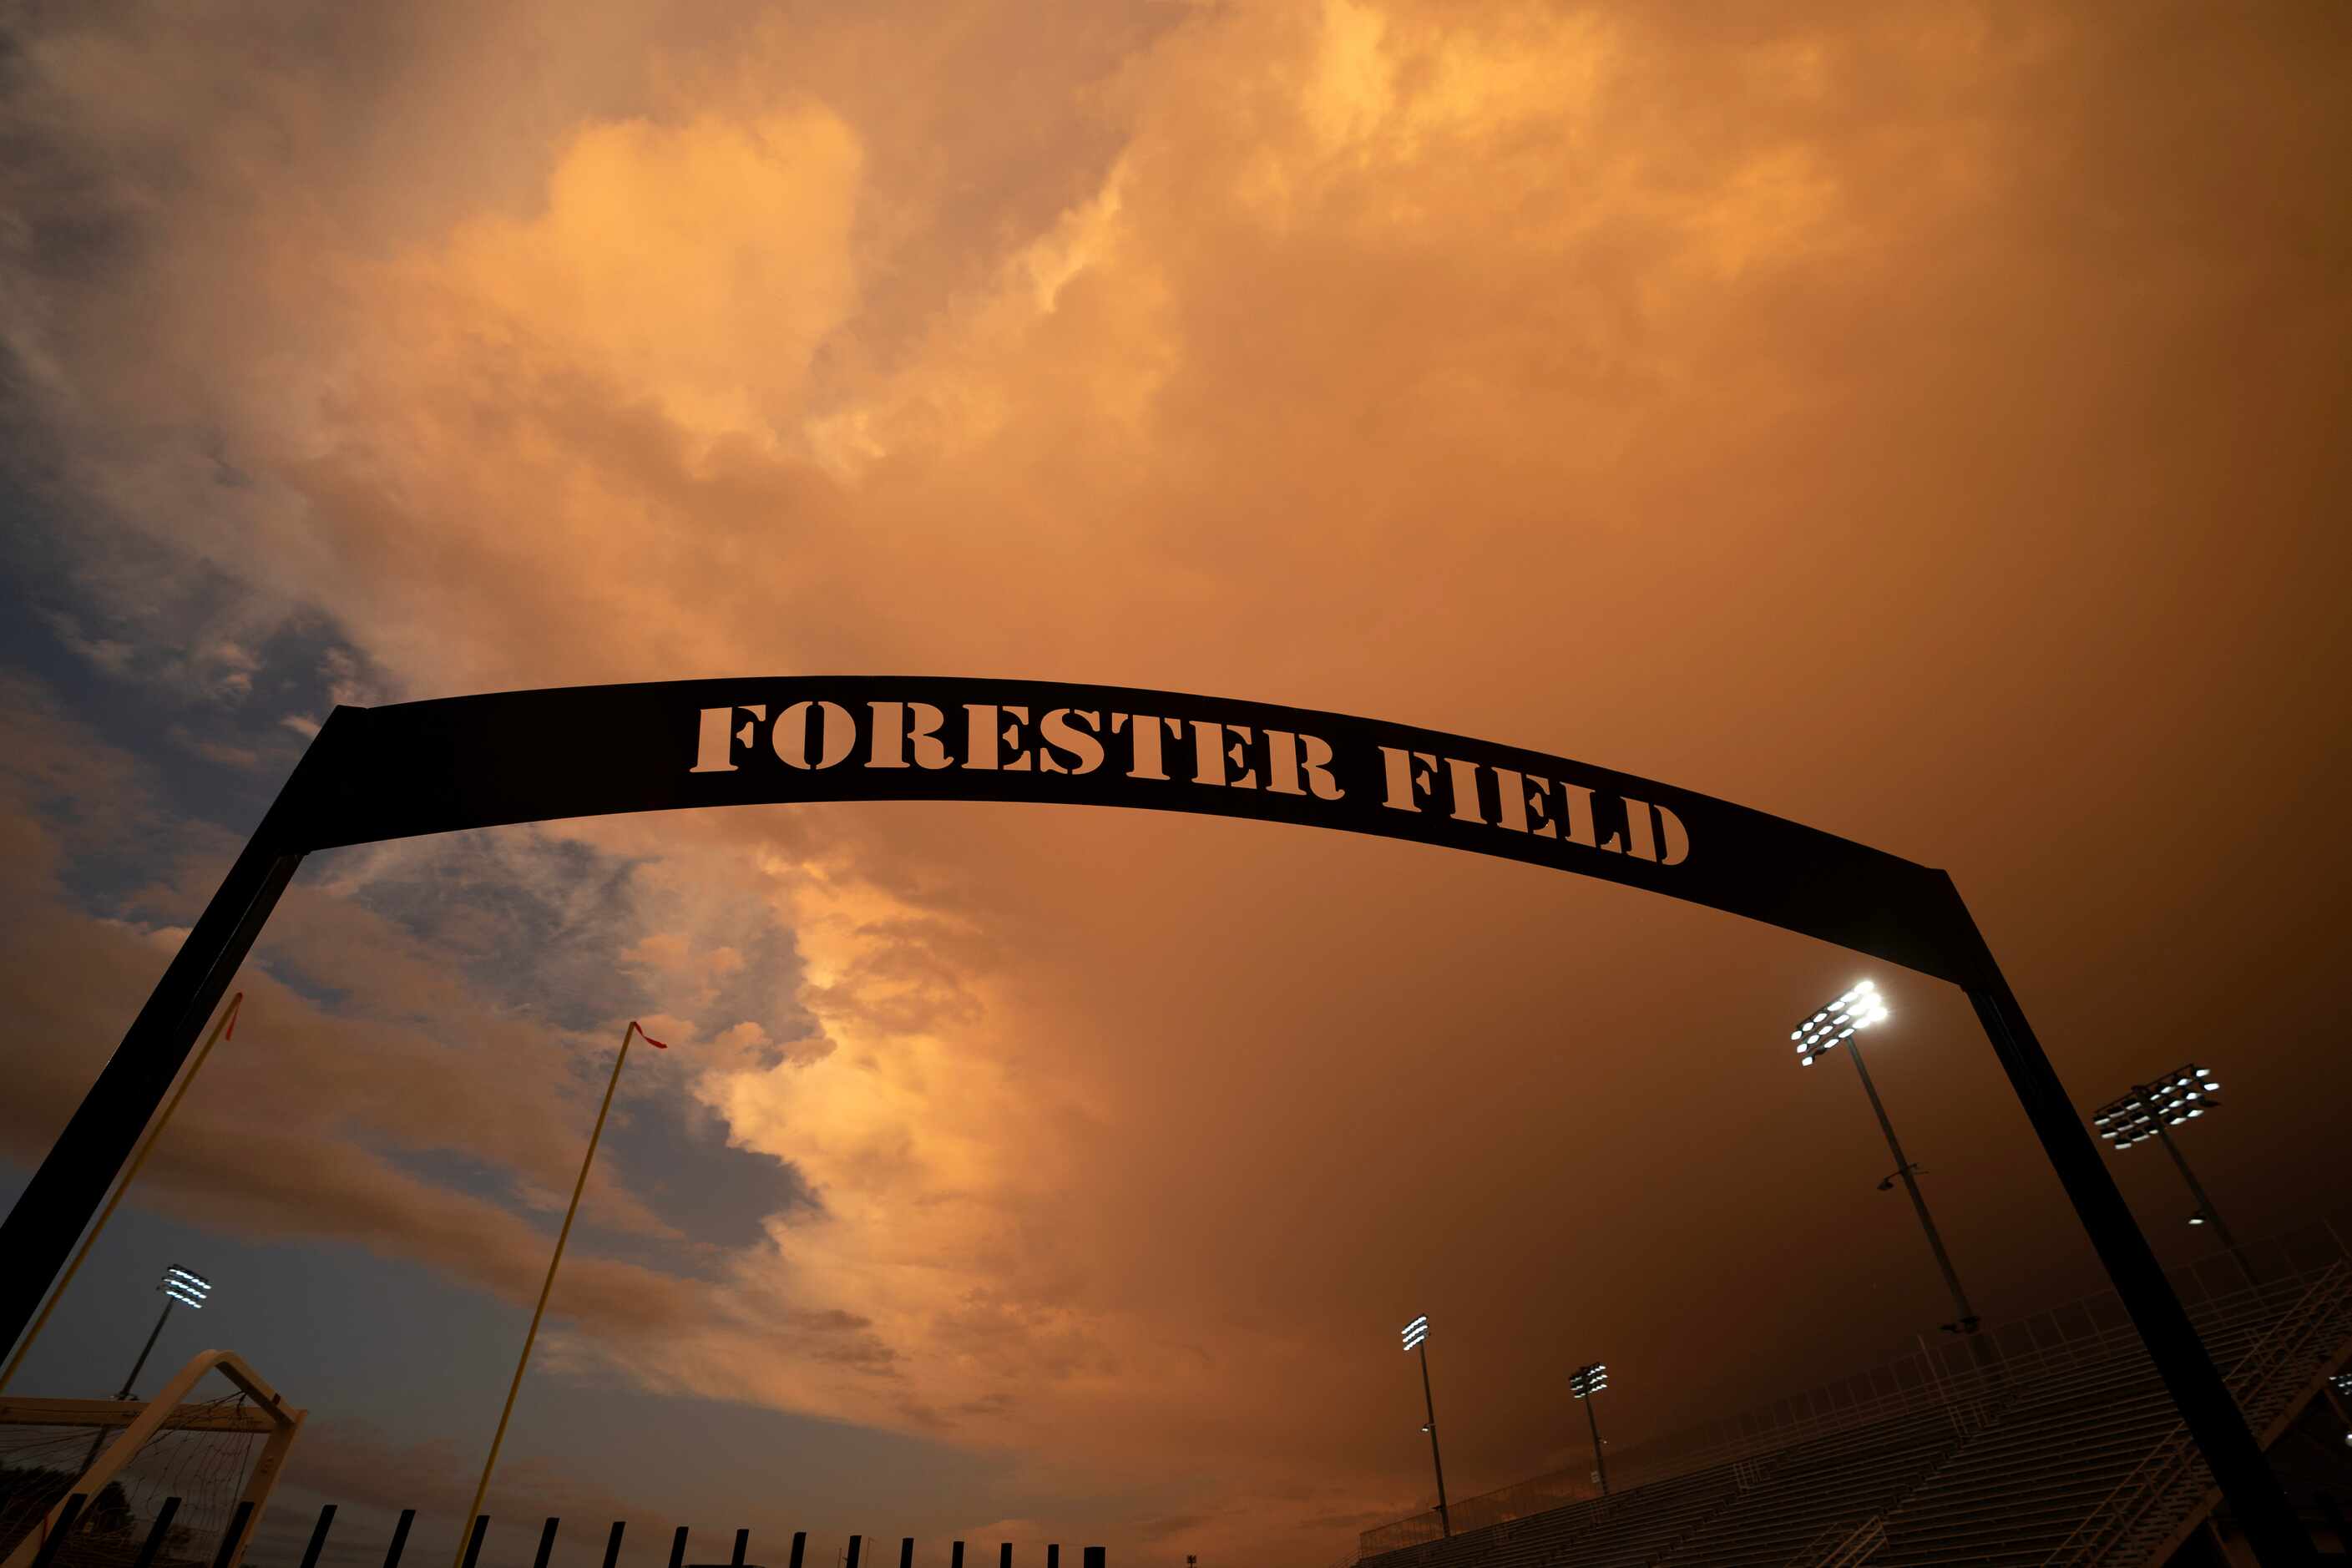 storm clouds hang low as the sun sets over Forester Field during a lightning delay before a...